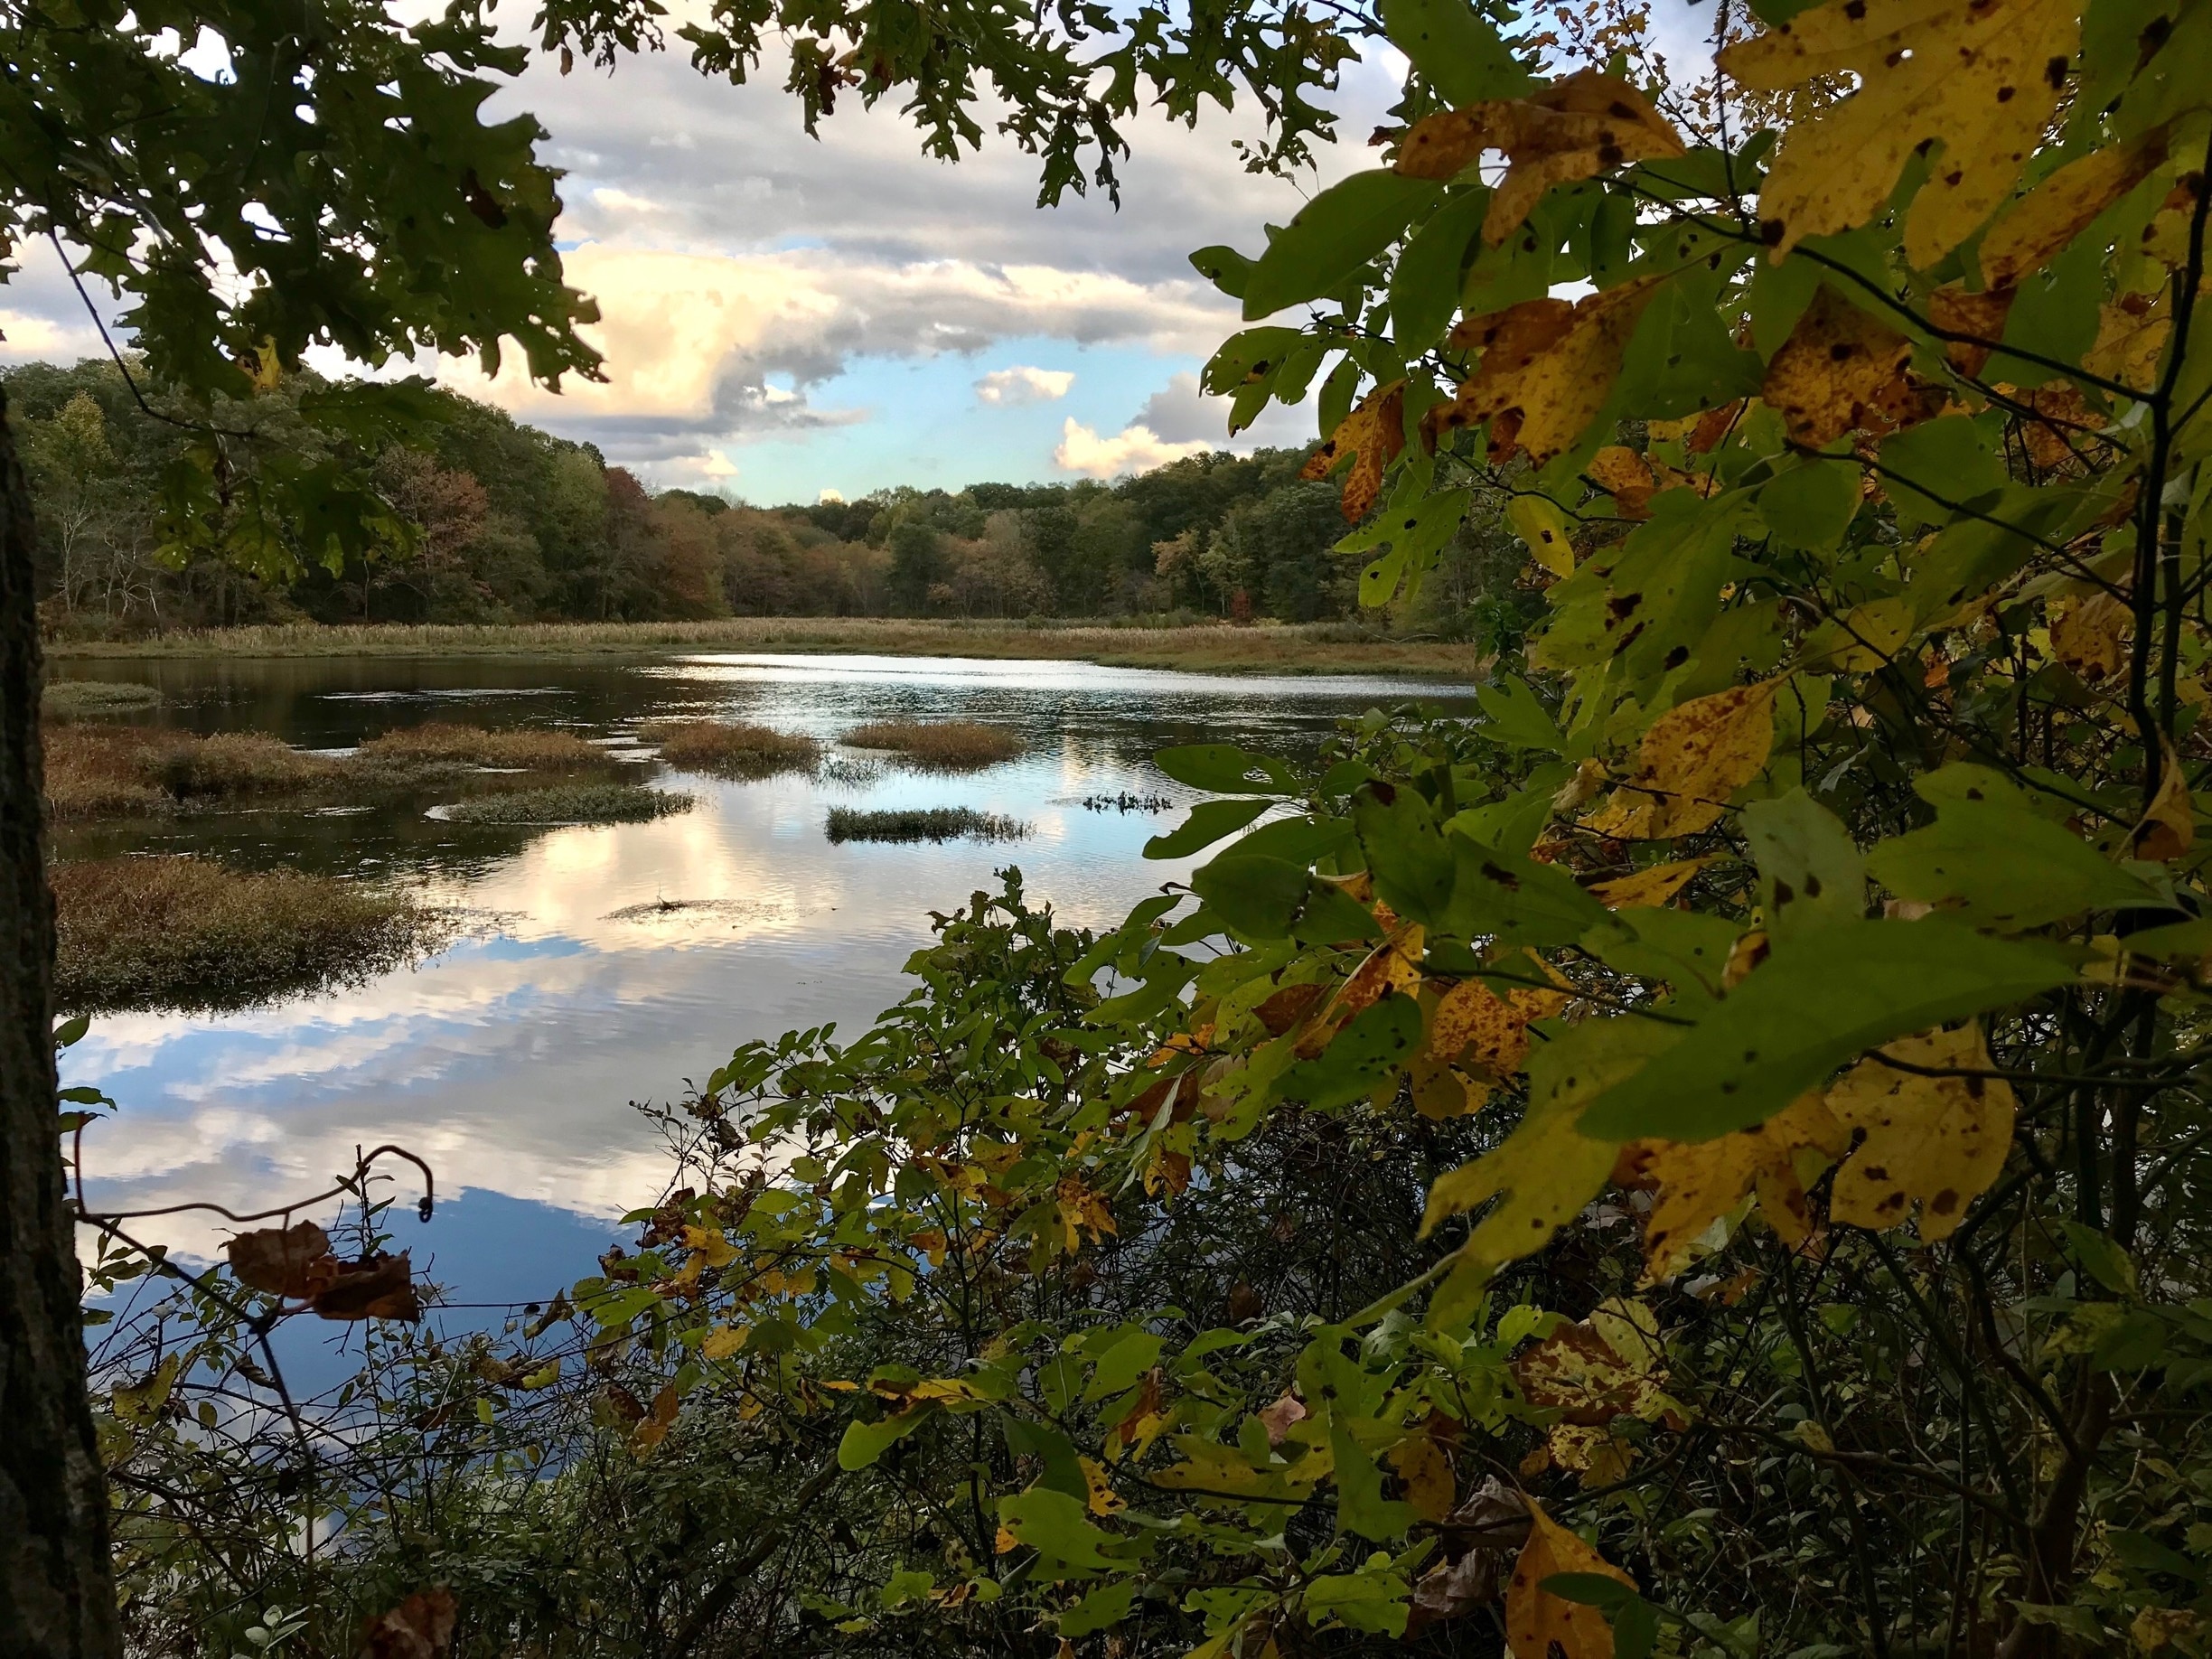 Do this look like New Jersey USA to you?  It’s Waterloo Village and it’s beautiful in the fall. This was captured during the annual Geocaching Mega event. 
#greatoutdoors
#yepitsjersey
#geocache
October 2018

Waterloo Village is a restored 19th-century canal town in Byram Township, Sussex County in northwestern New Jersey, United States. The community was approximately the half-way point in the roughly 102-mile trip along the Morris Canal, which ran from Jersey City to Phillipsburg, New Jersey